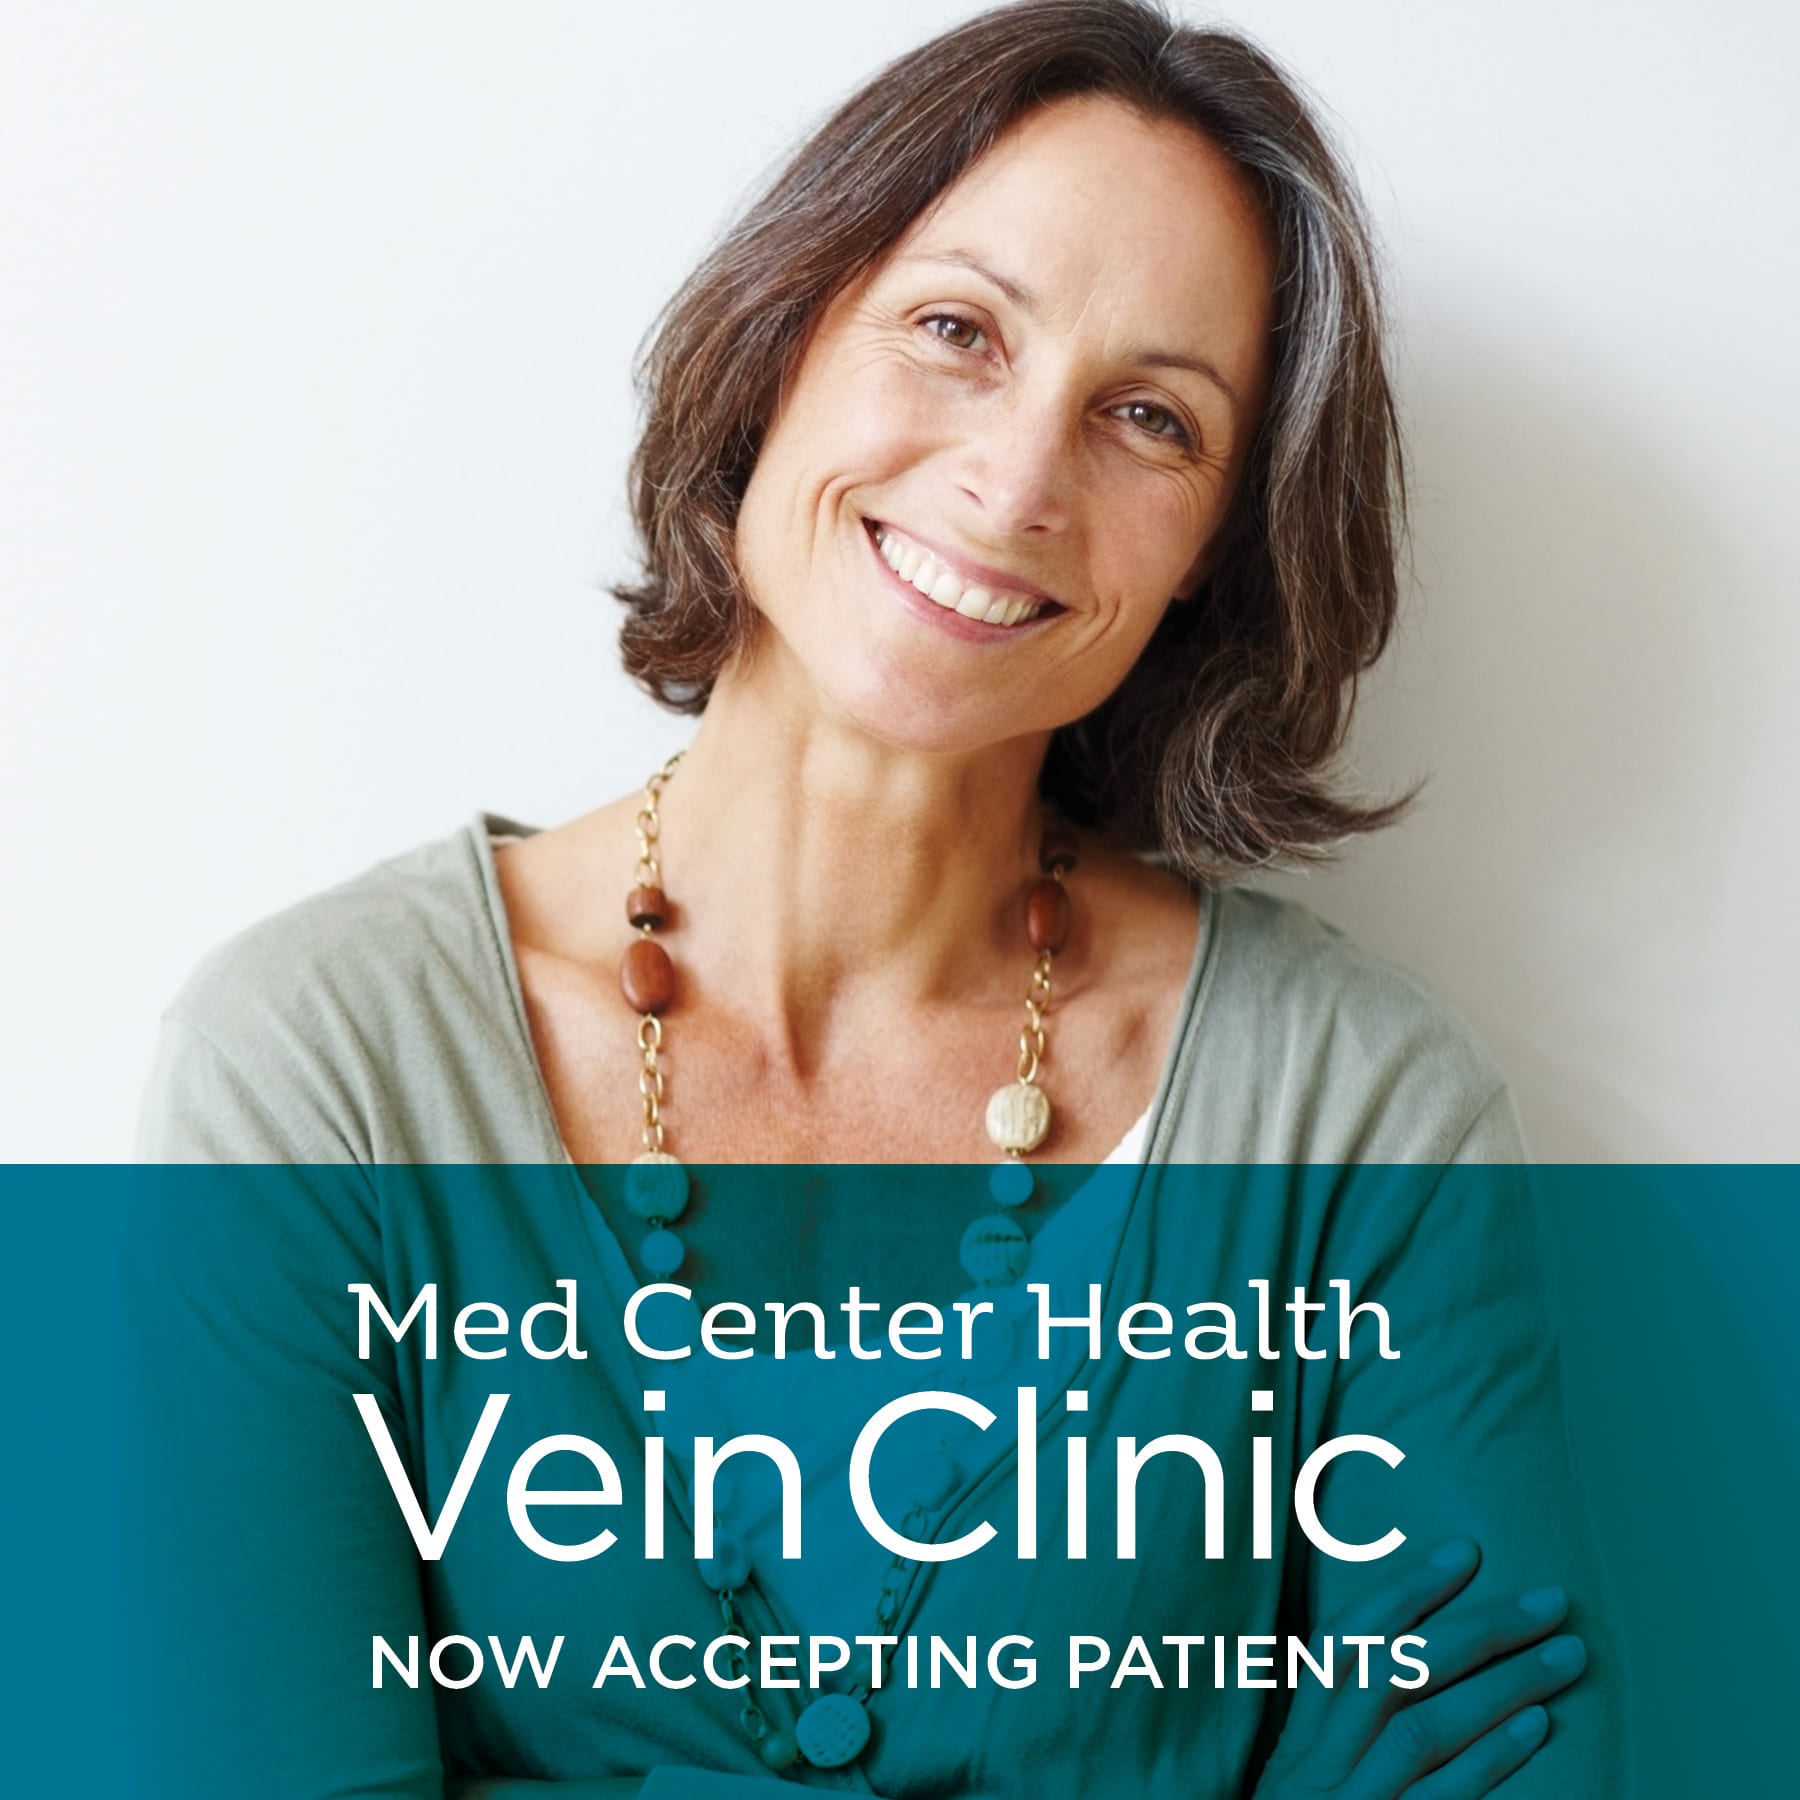 Med Center Health Vein Clinic now accepting patients.